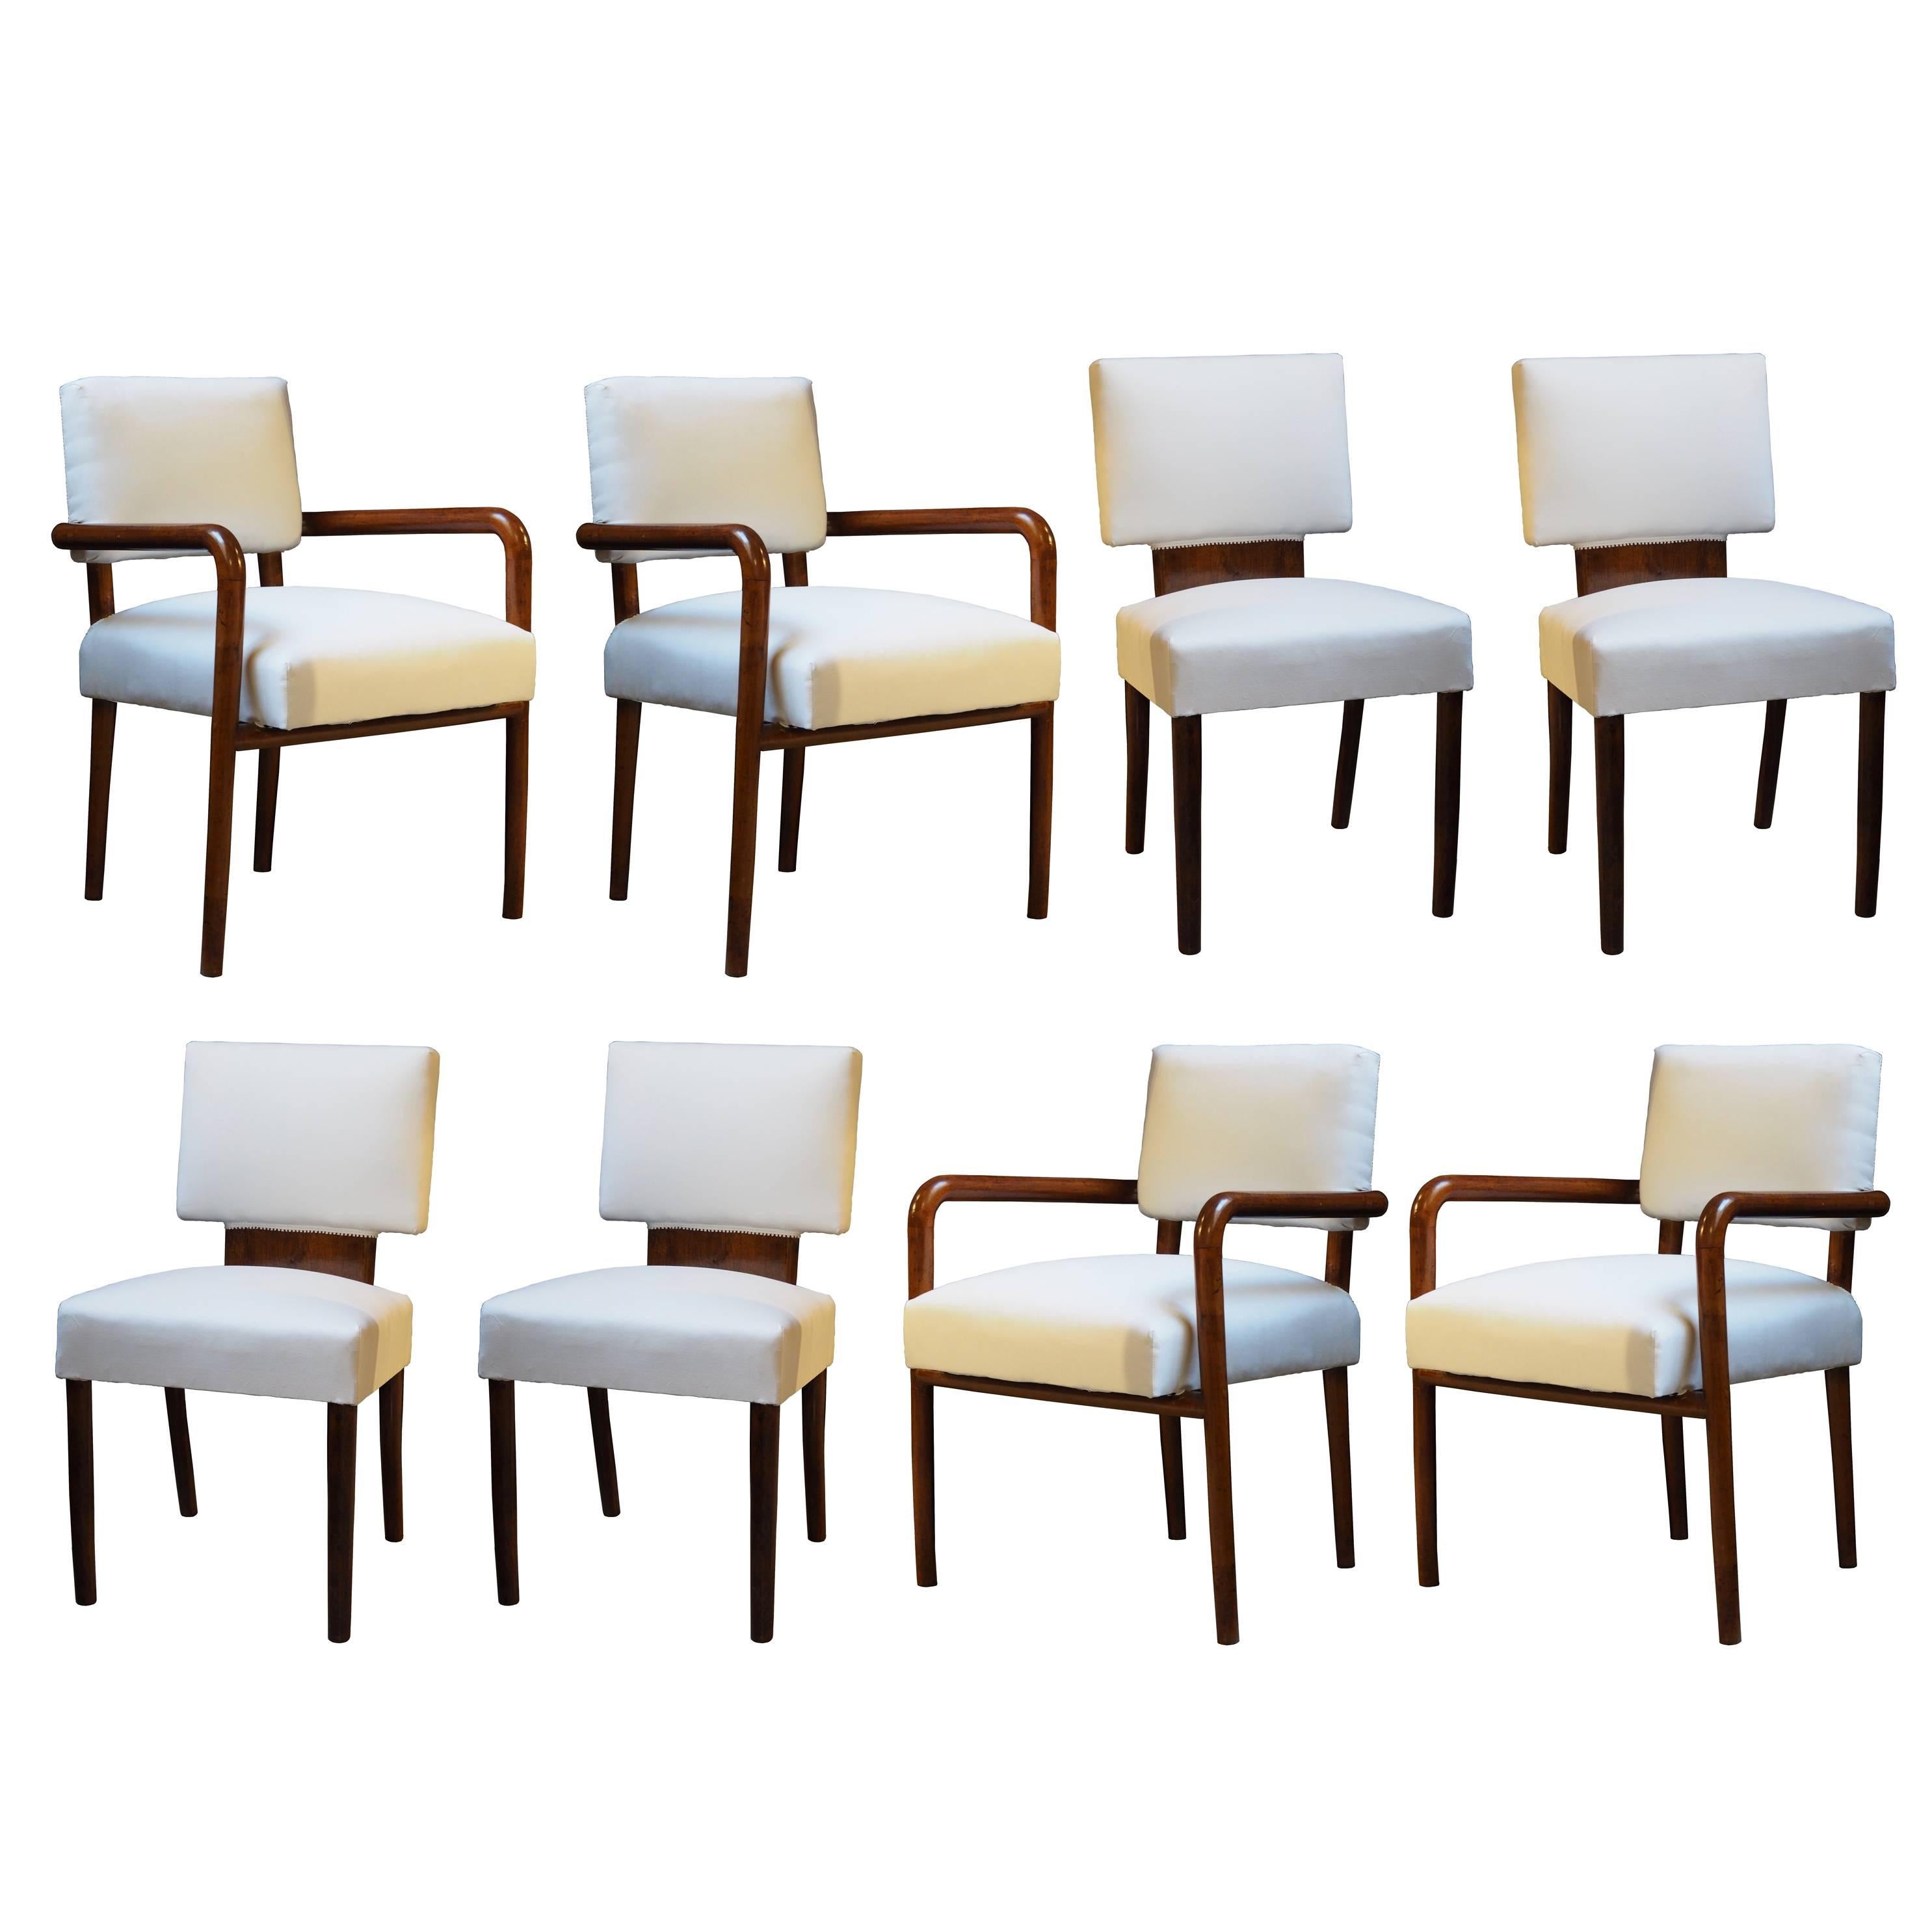 Gino Levi Montalcini Set of Four Chairs and Four Armchairs, 1938